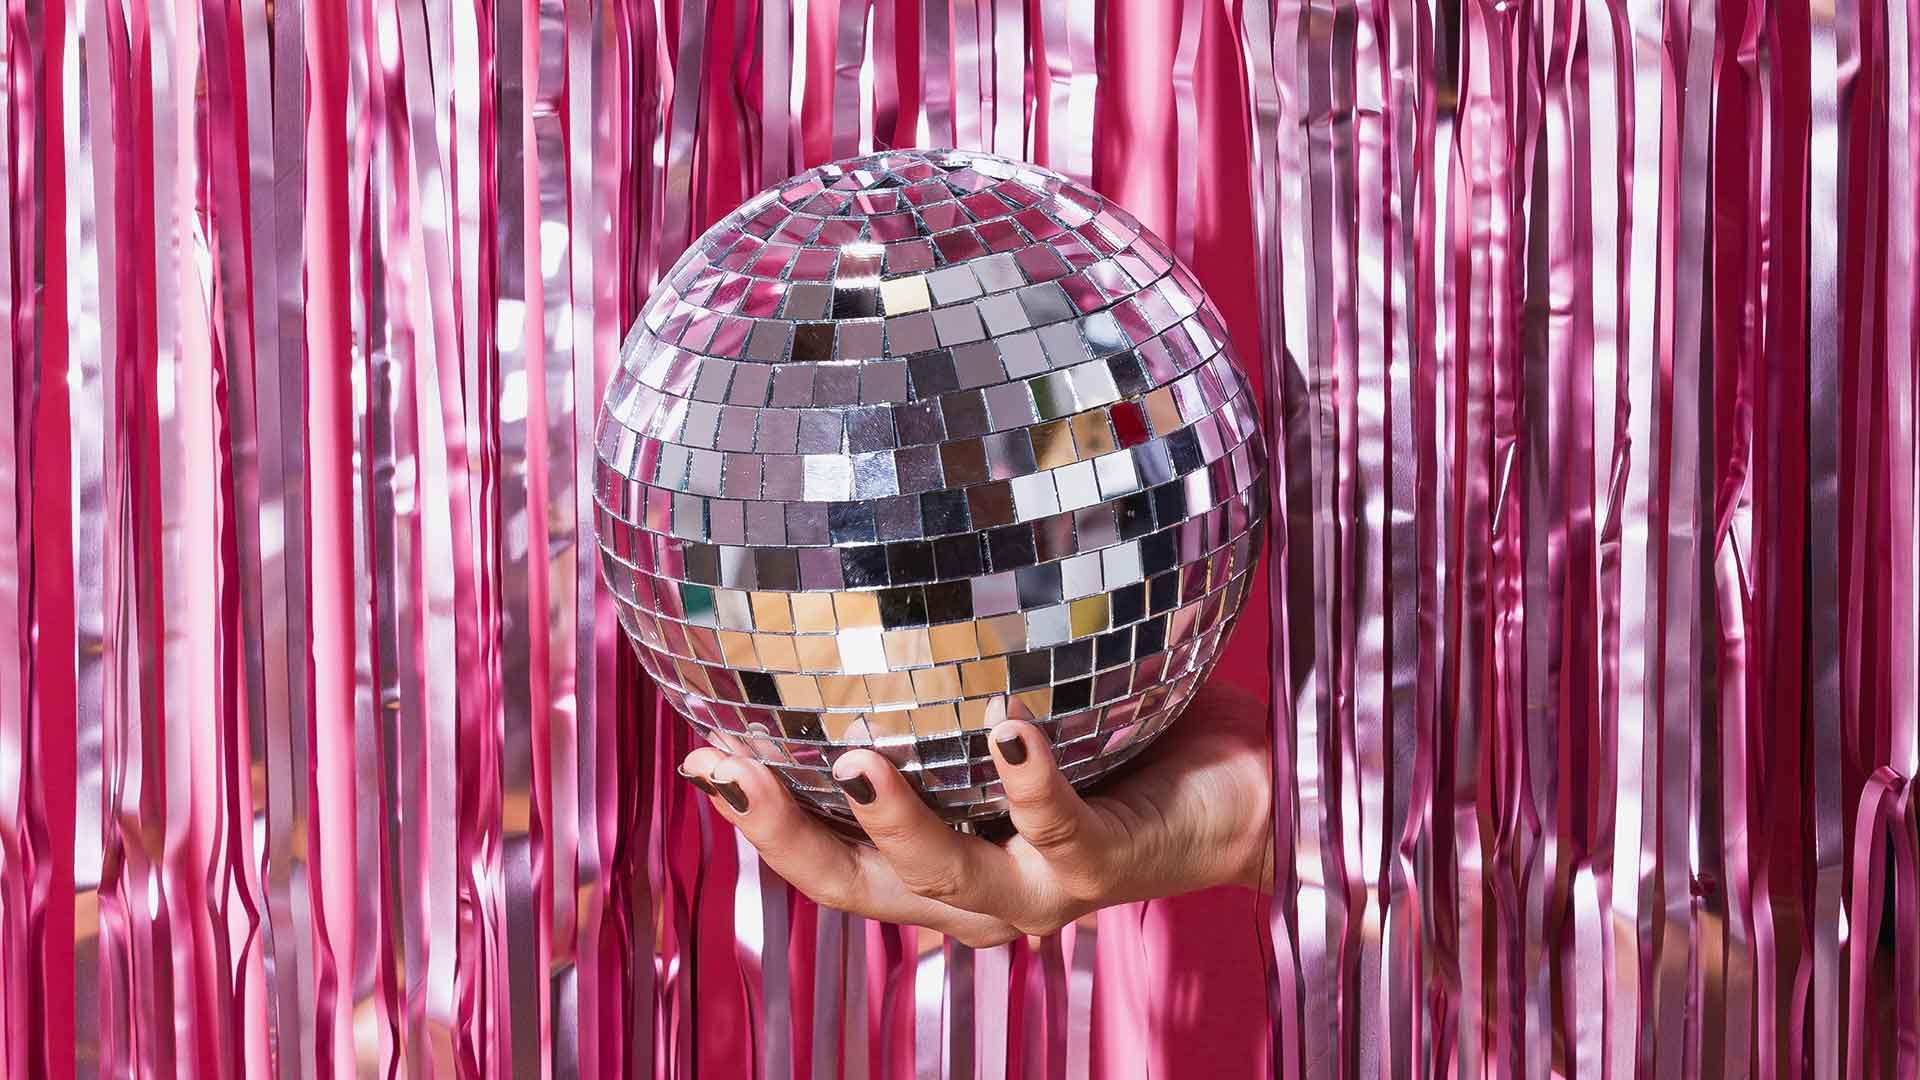 Disco ball held by hand coming out of pink curtain